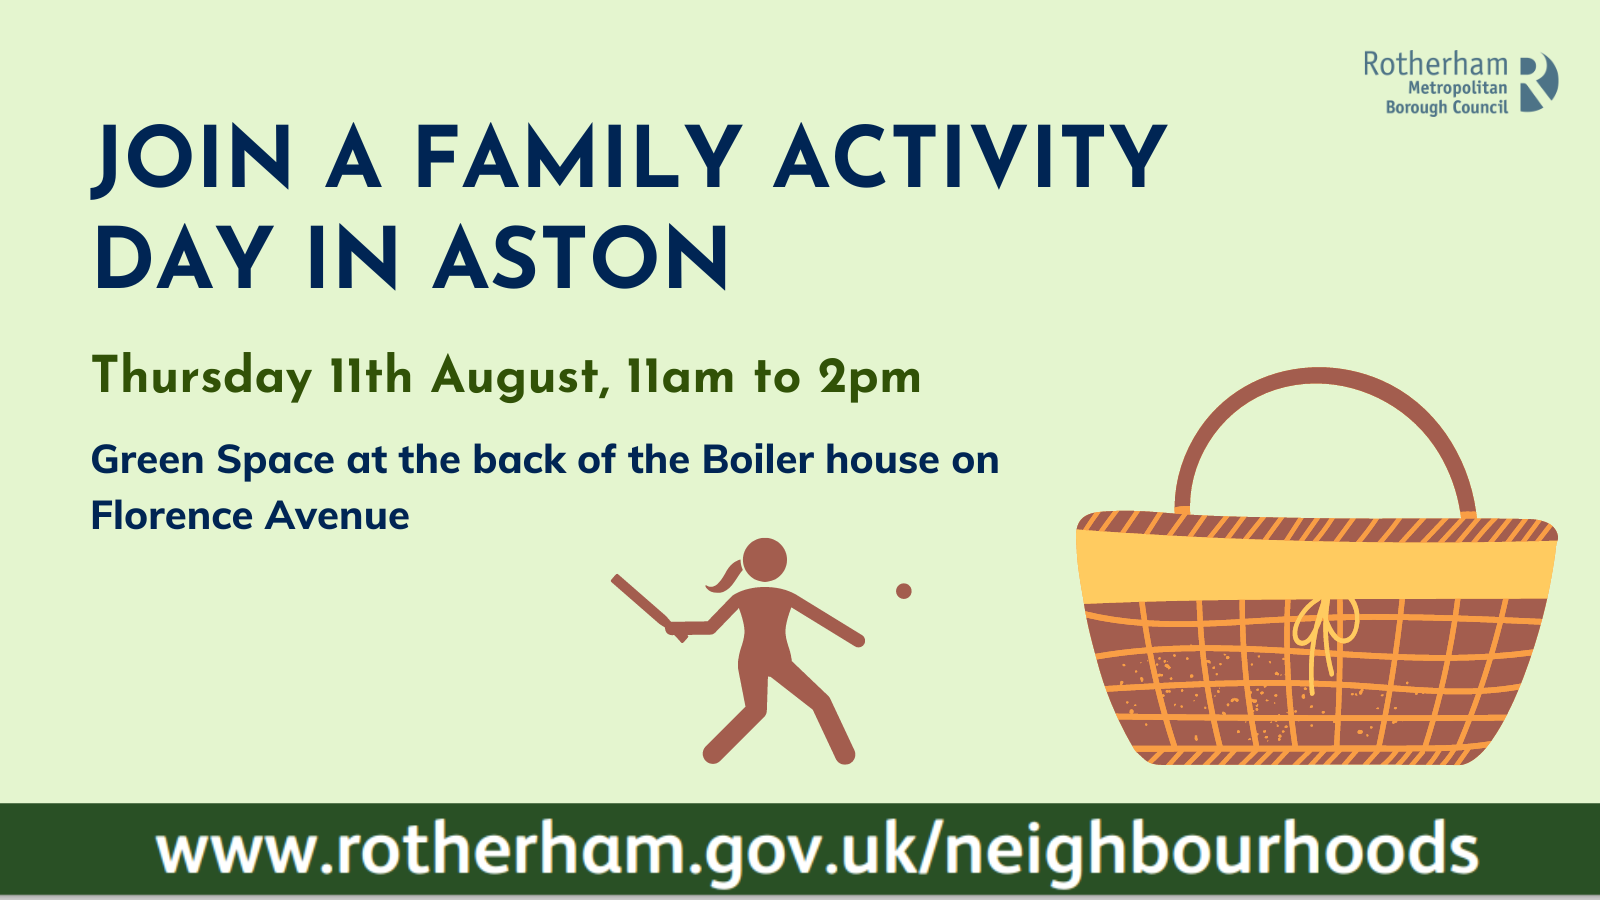 Family activity day in Aston